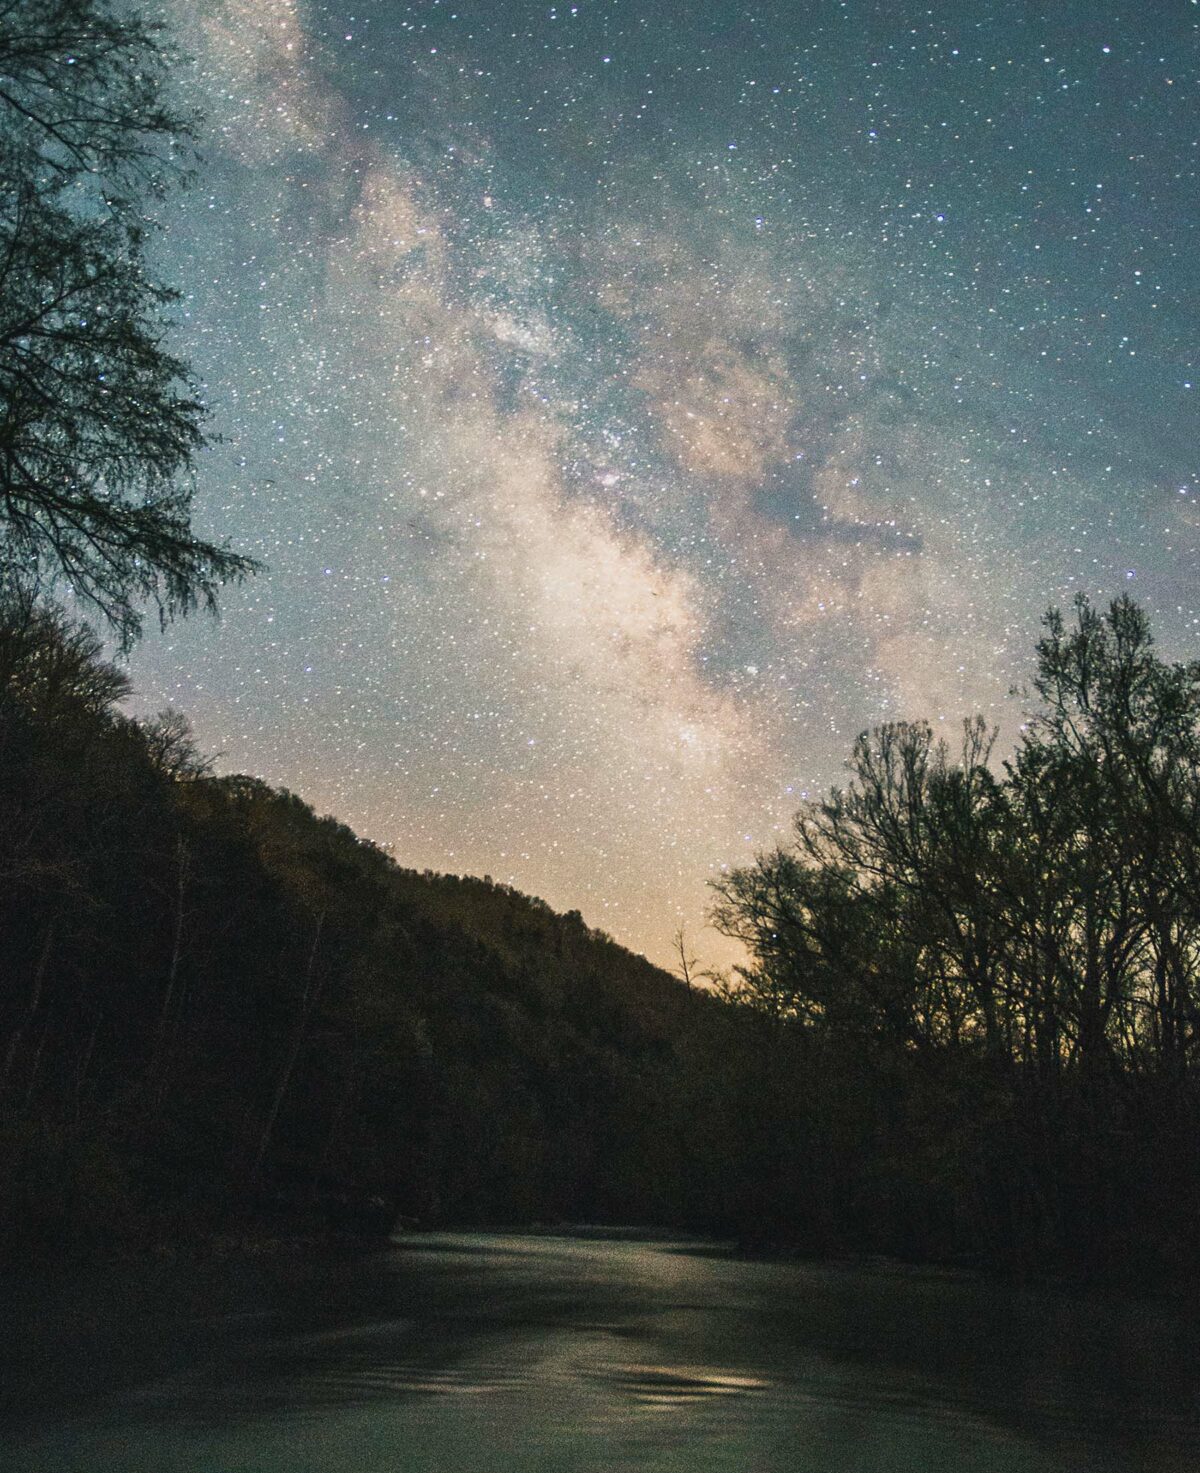 Search the skies at America’s 5 top campgrounds for stargazing